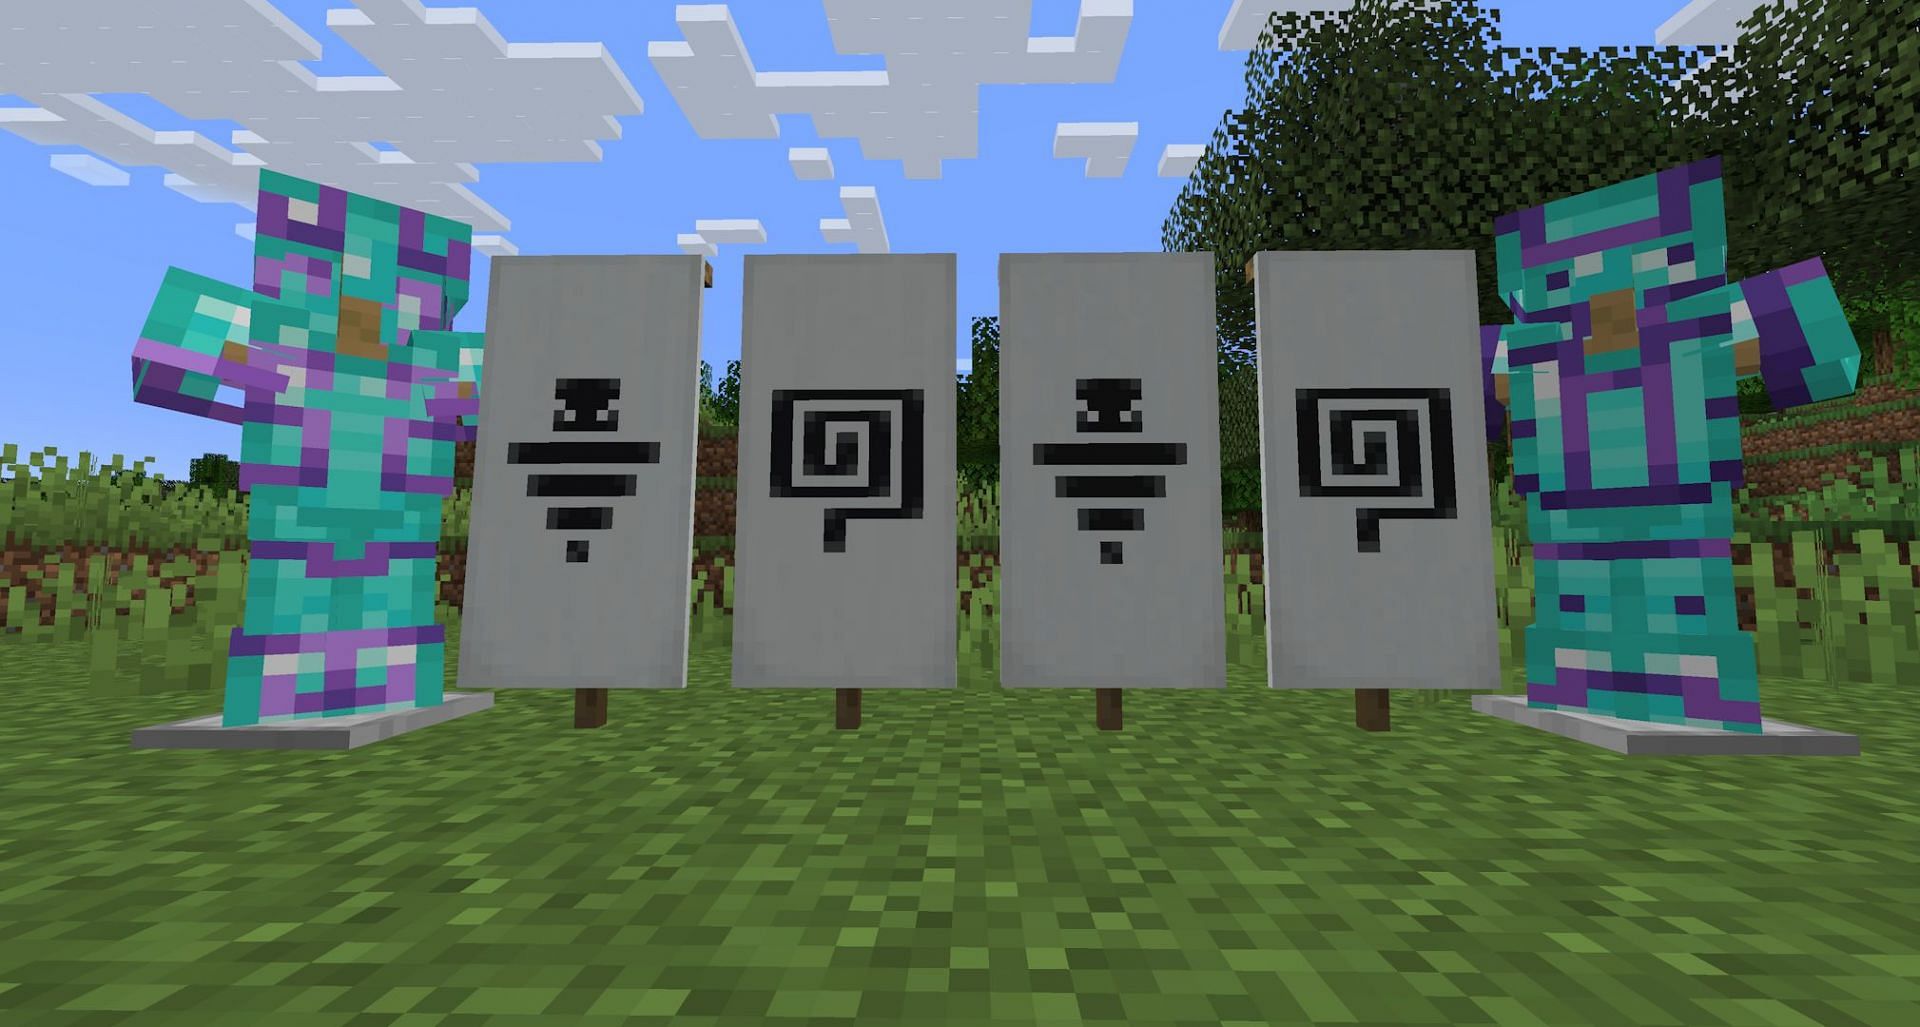 The new banner and trim options should allow for better personalization (Image via Mojang)